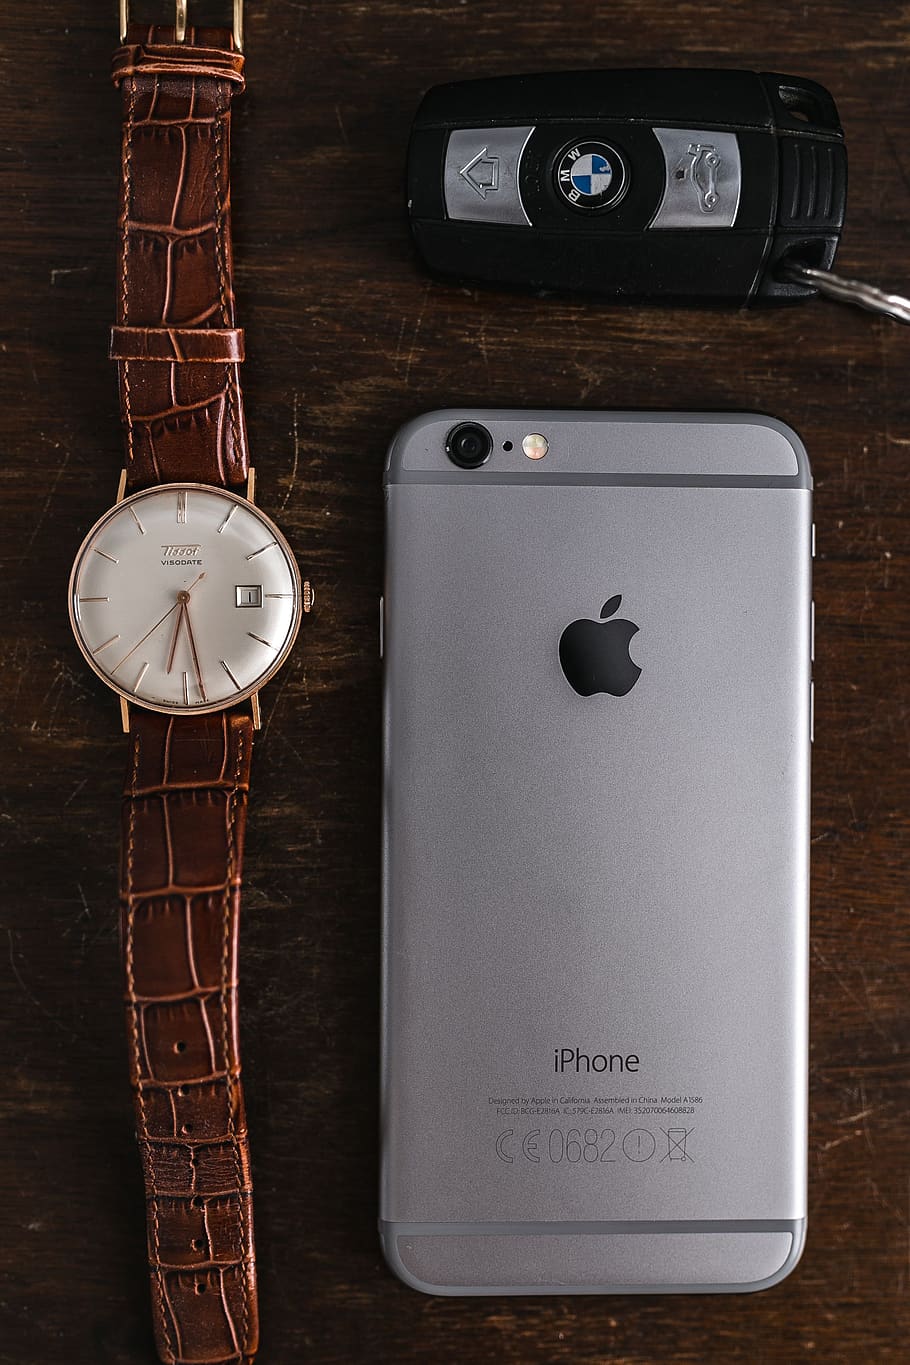 technology, iphone 6, essentials, male, watch, hipster, iphone 6s, grey iphone, tissot, devices